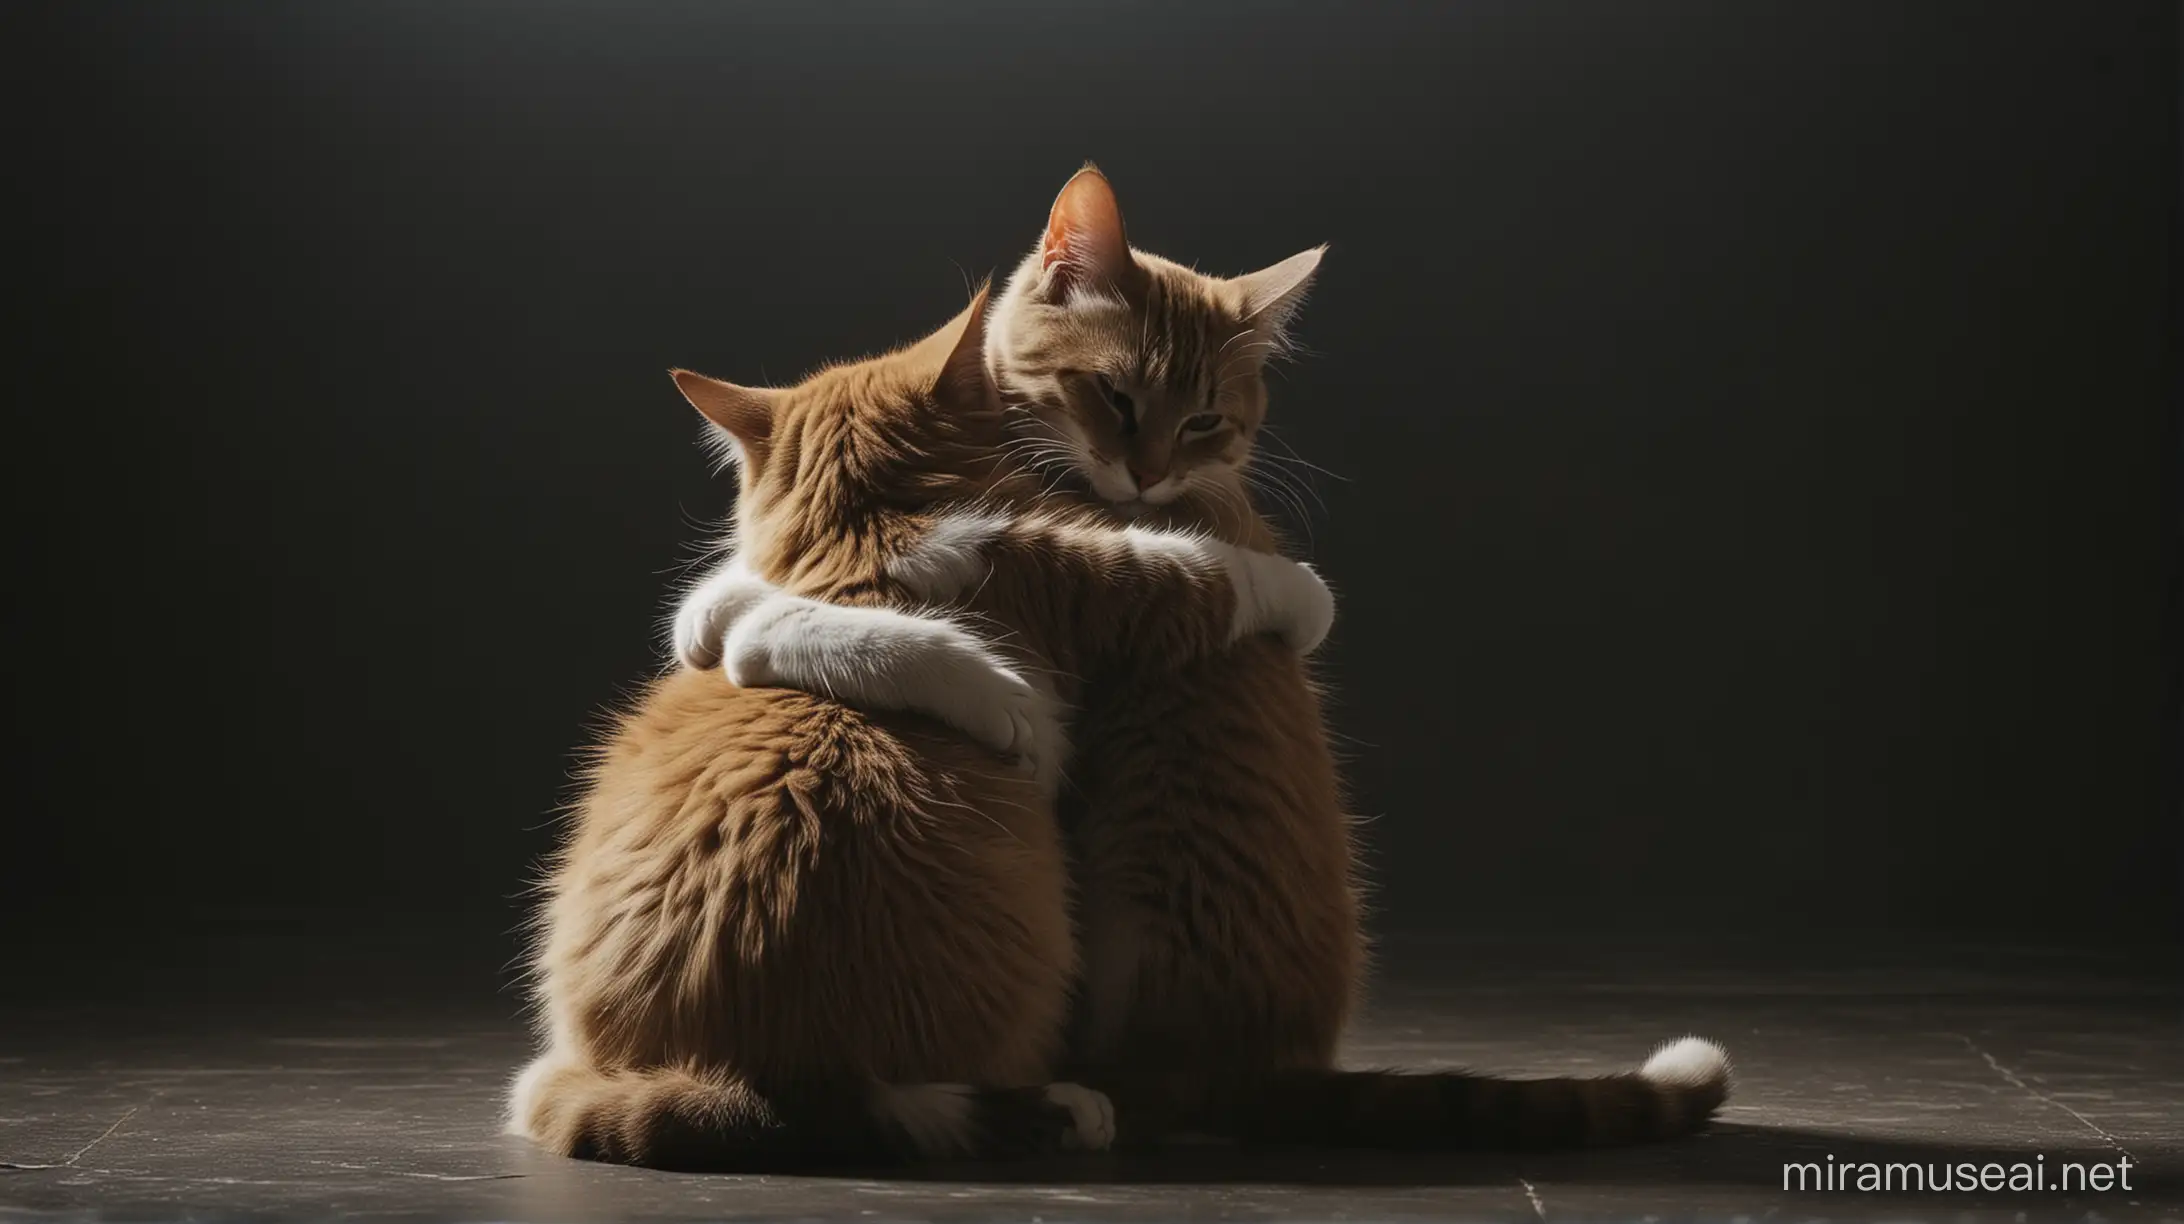 Intimate Moment of Two Cats Embracing in a Dimly Lit Room